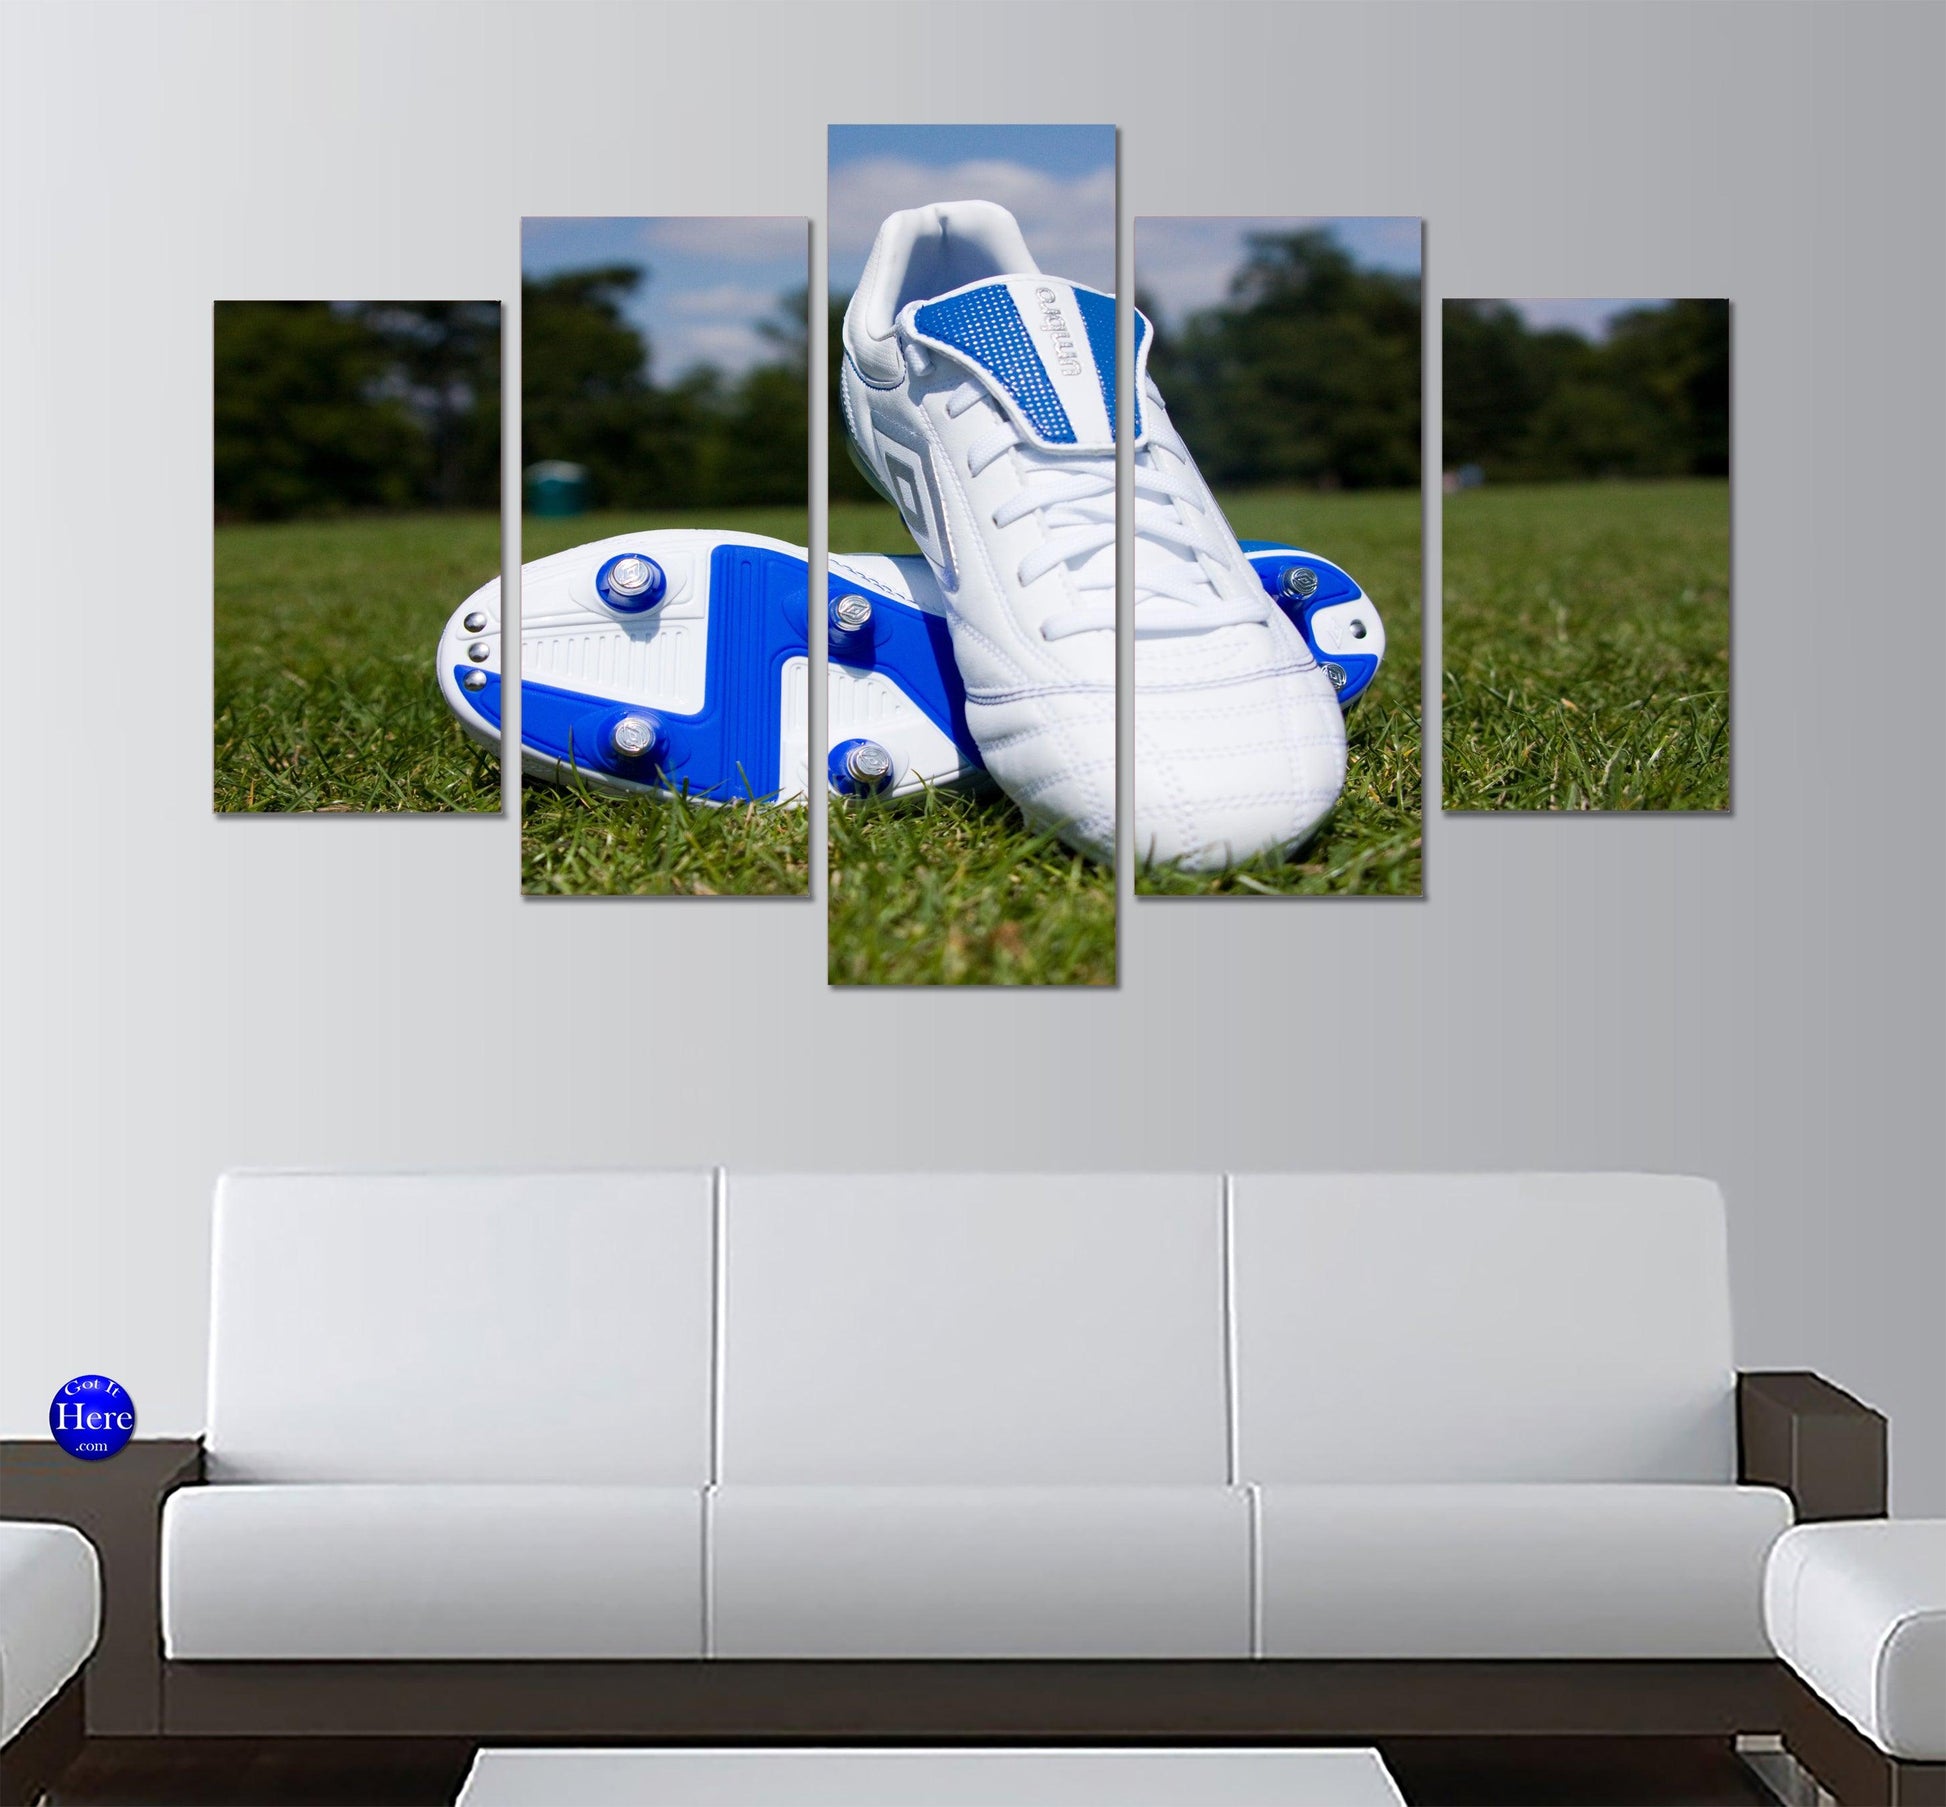 Blue And White Umbro Football Boots 5 Panel Canvas Print Wall Art - GotItHere.com